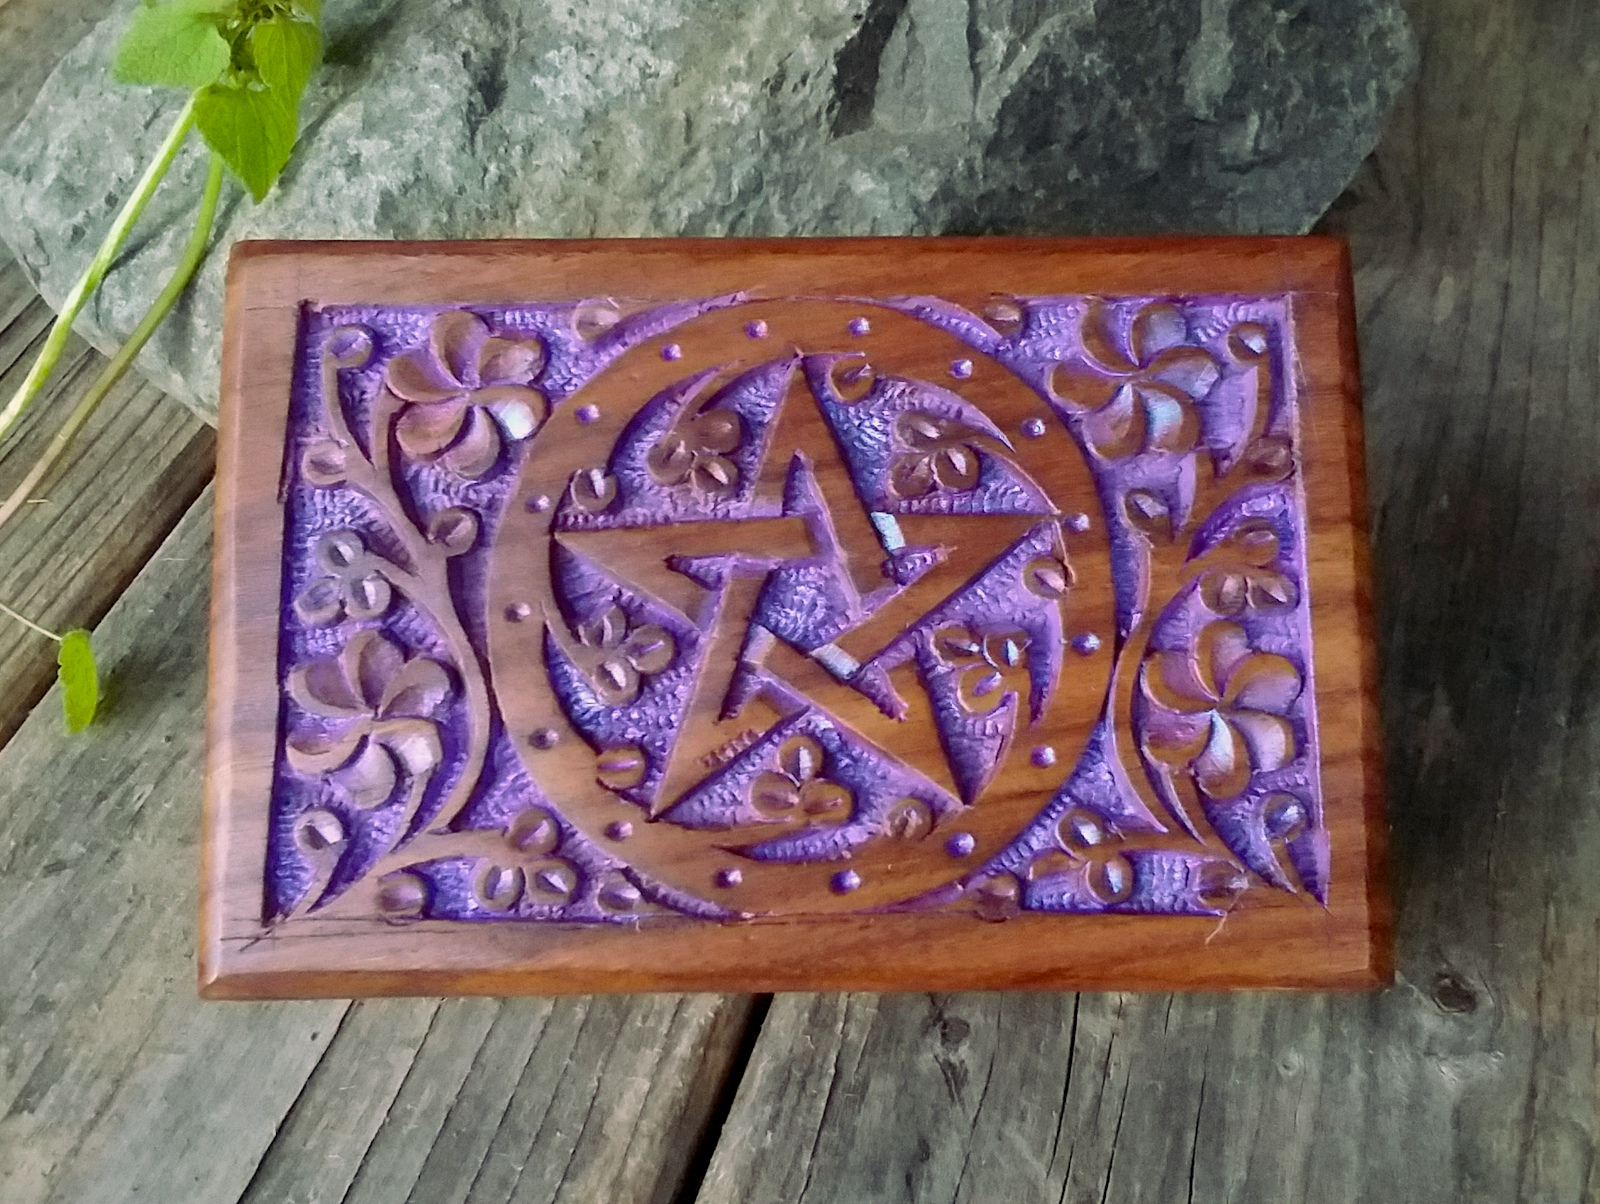 Pentacle floral carved wood box 4x6 Purple finish